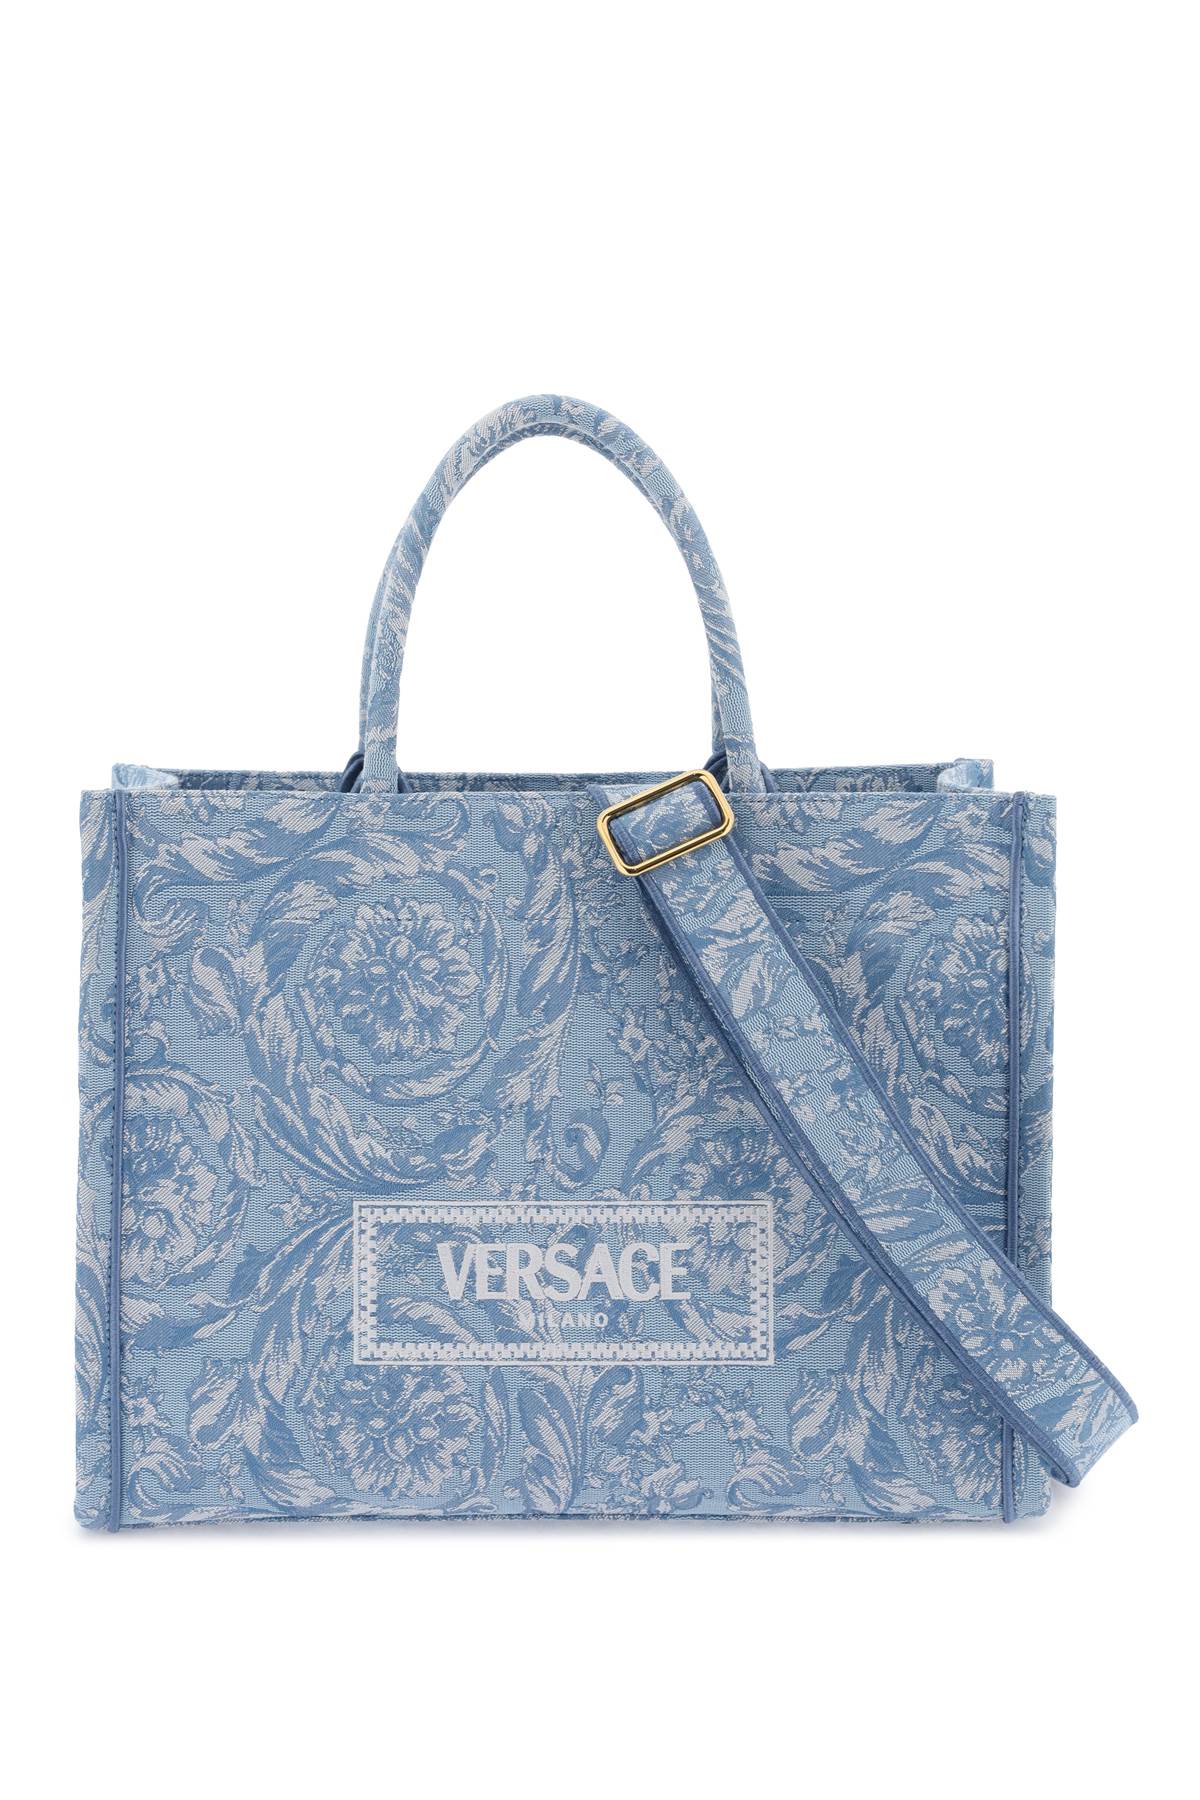 Versace Athena Barocco Tote Bag In Baby Blue Gentian Blue Ve (light Blue)